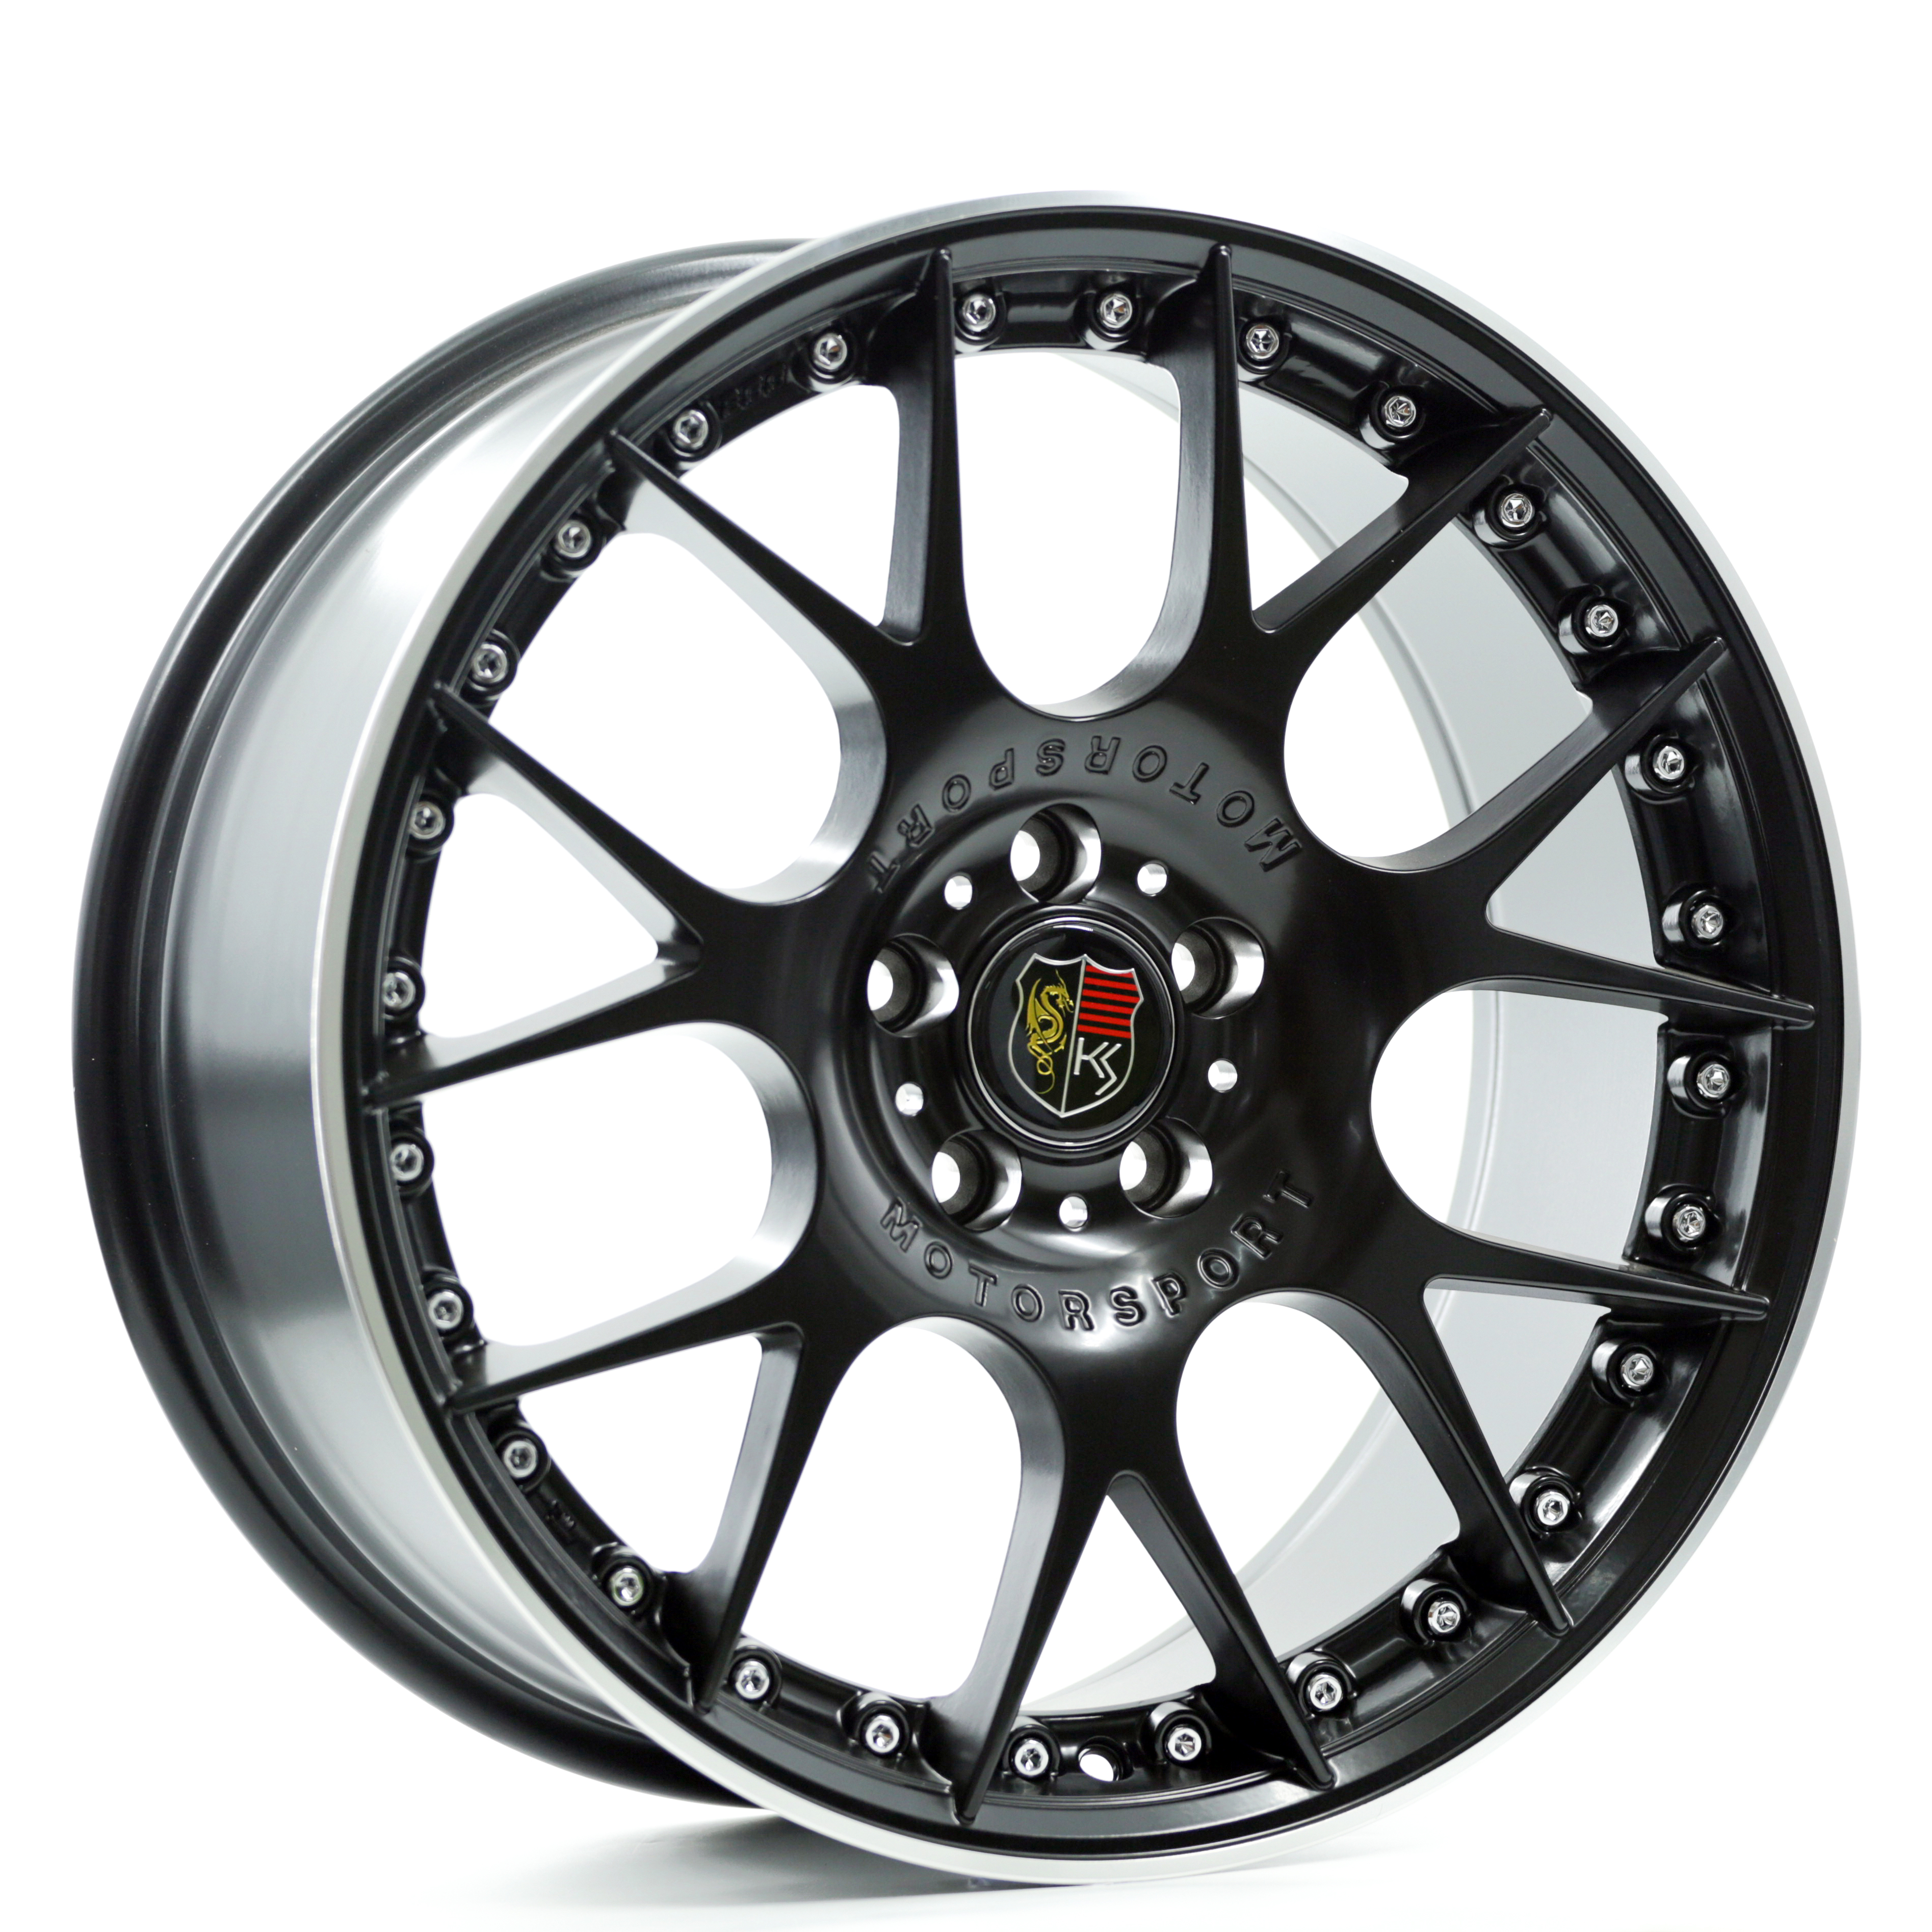 Mesh Design 18inch Aftermarket From Rayone Racing